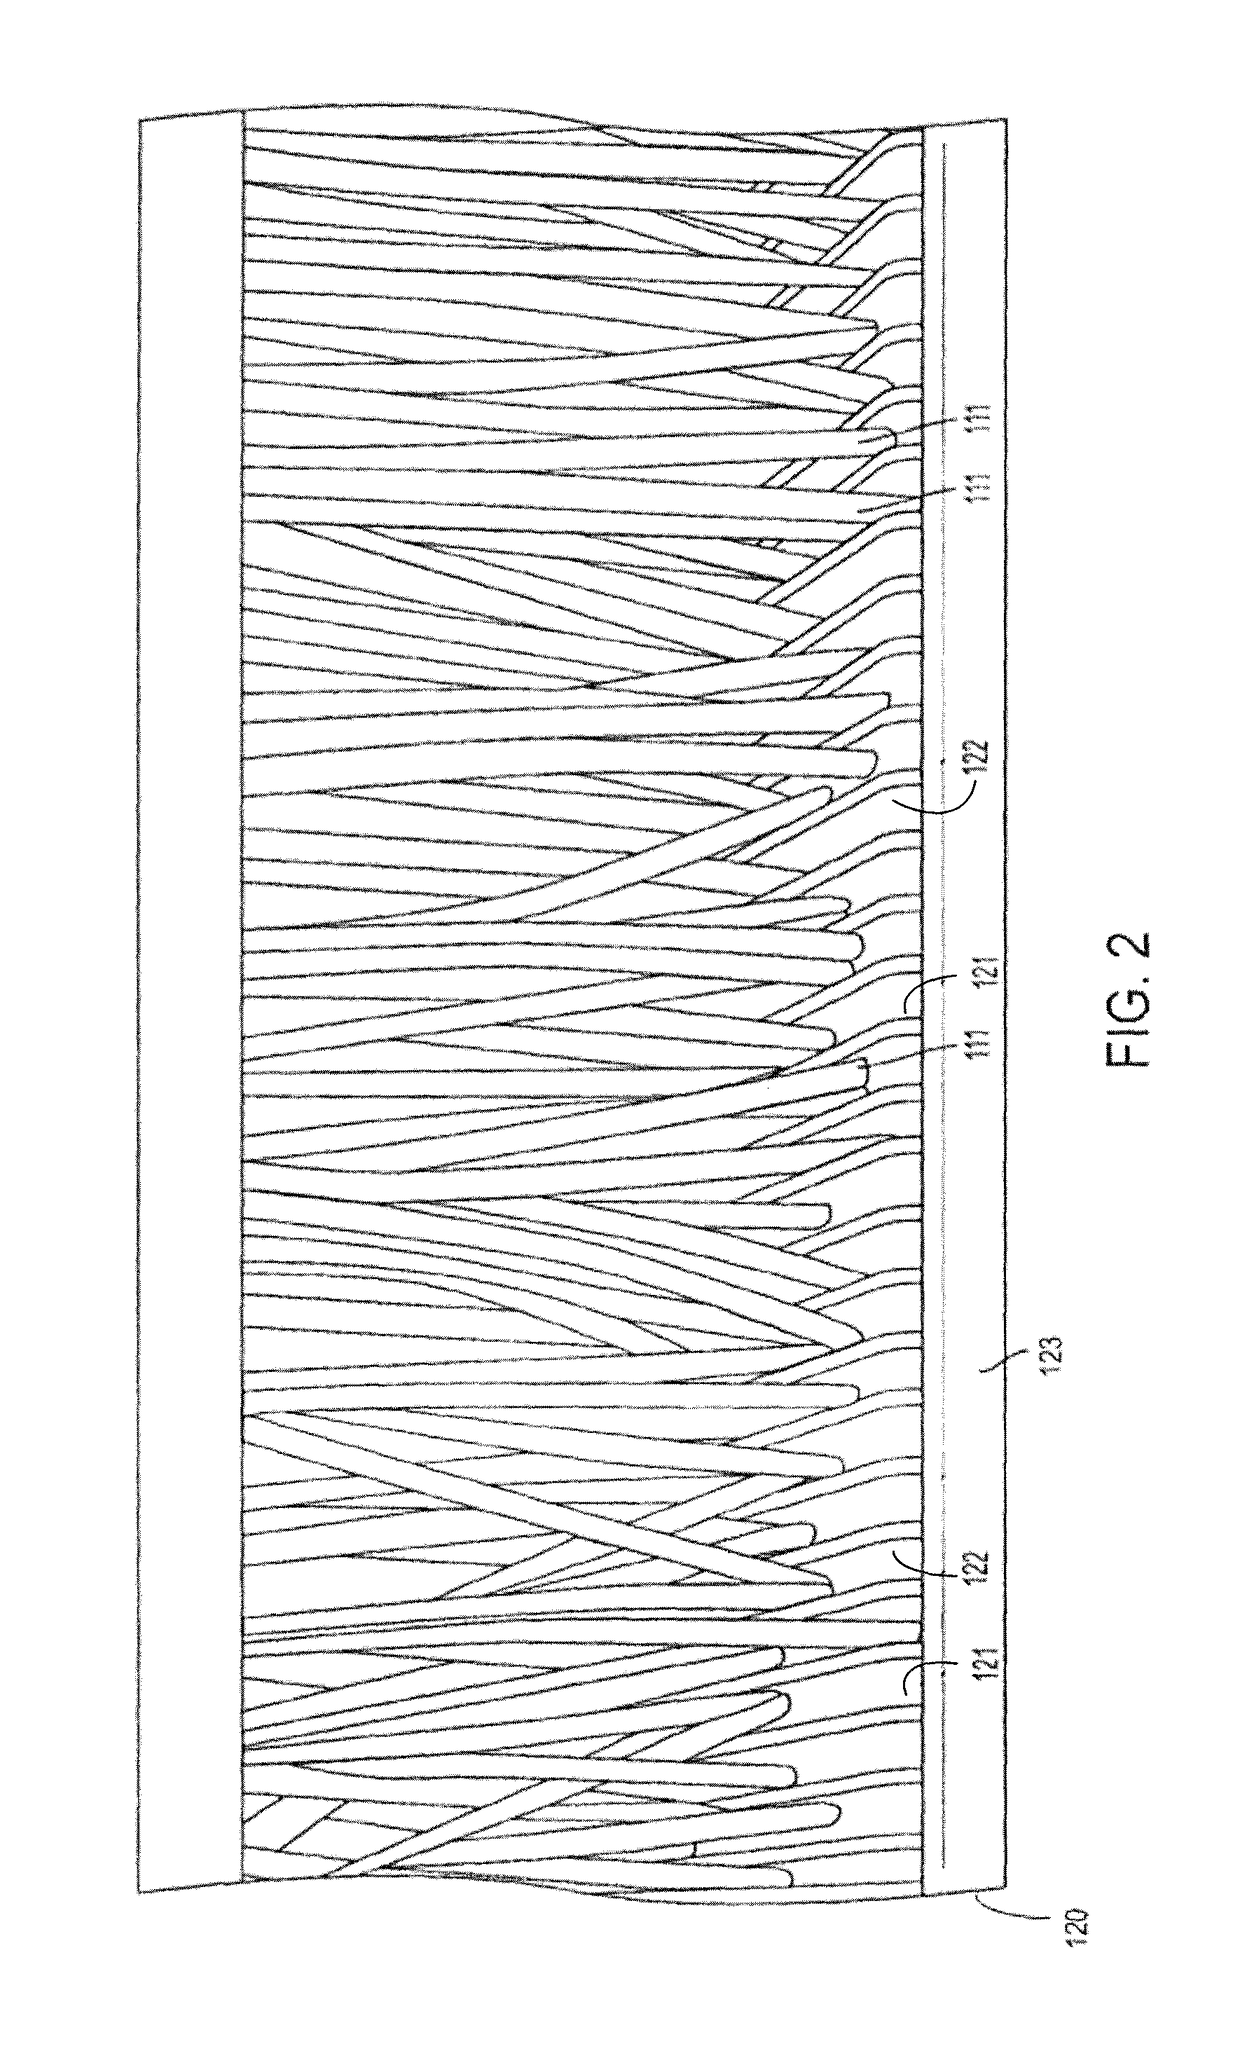 Apparatus, system and method for mechanical, selective plant removal in mature and establishing crops including turfgrasses